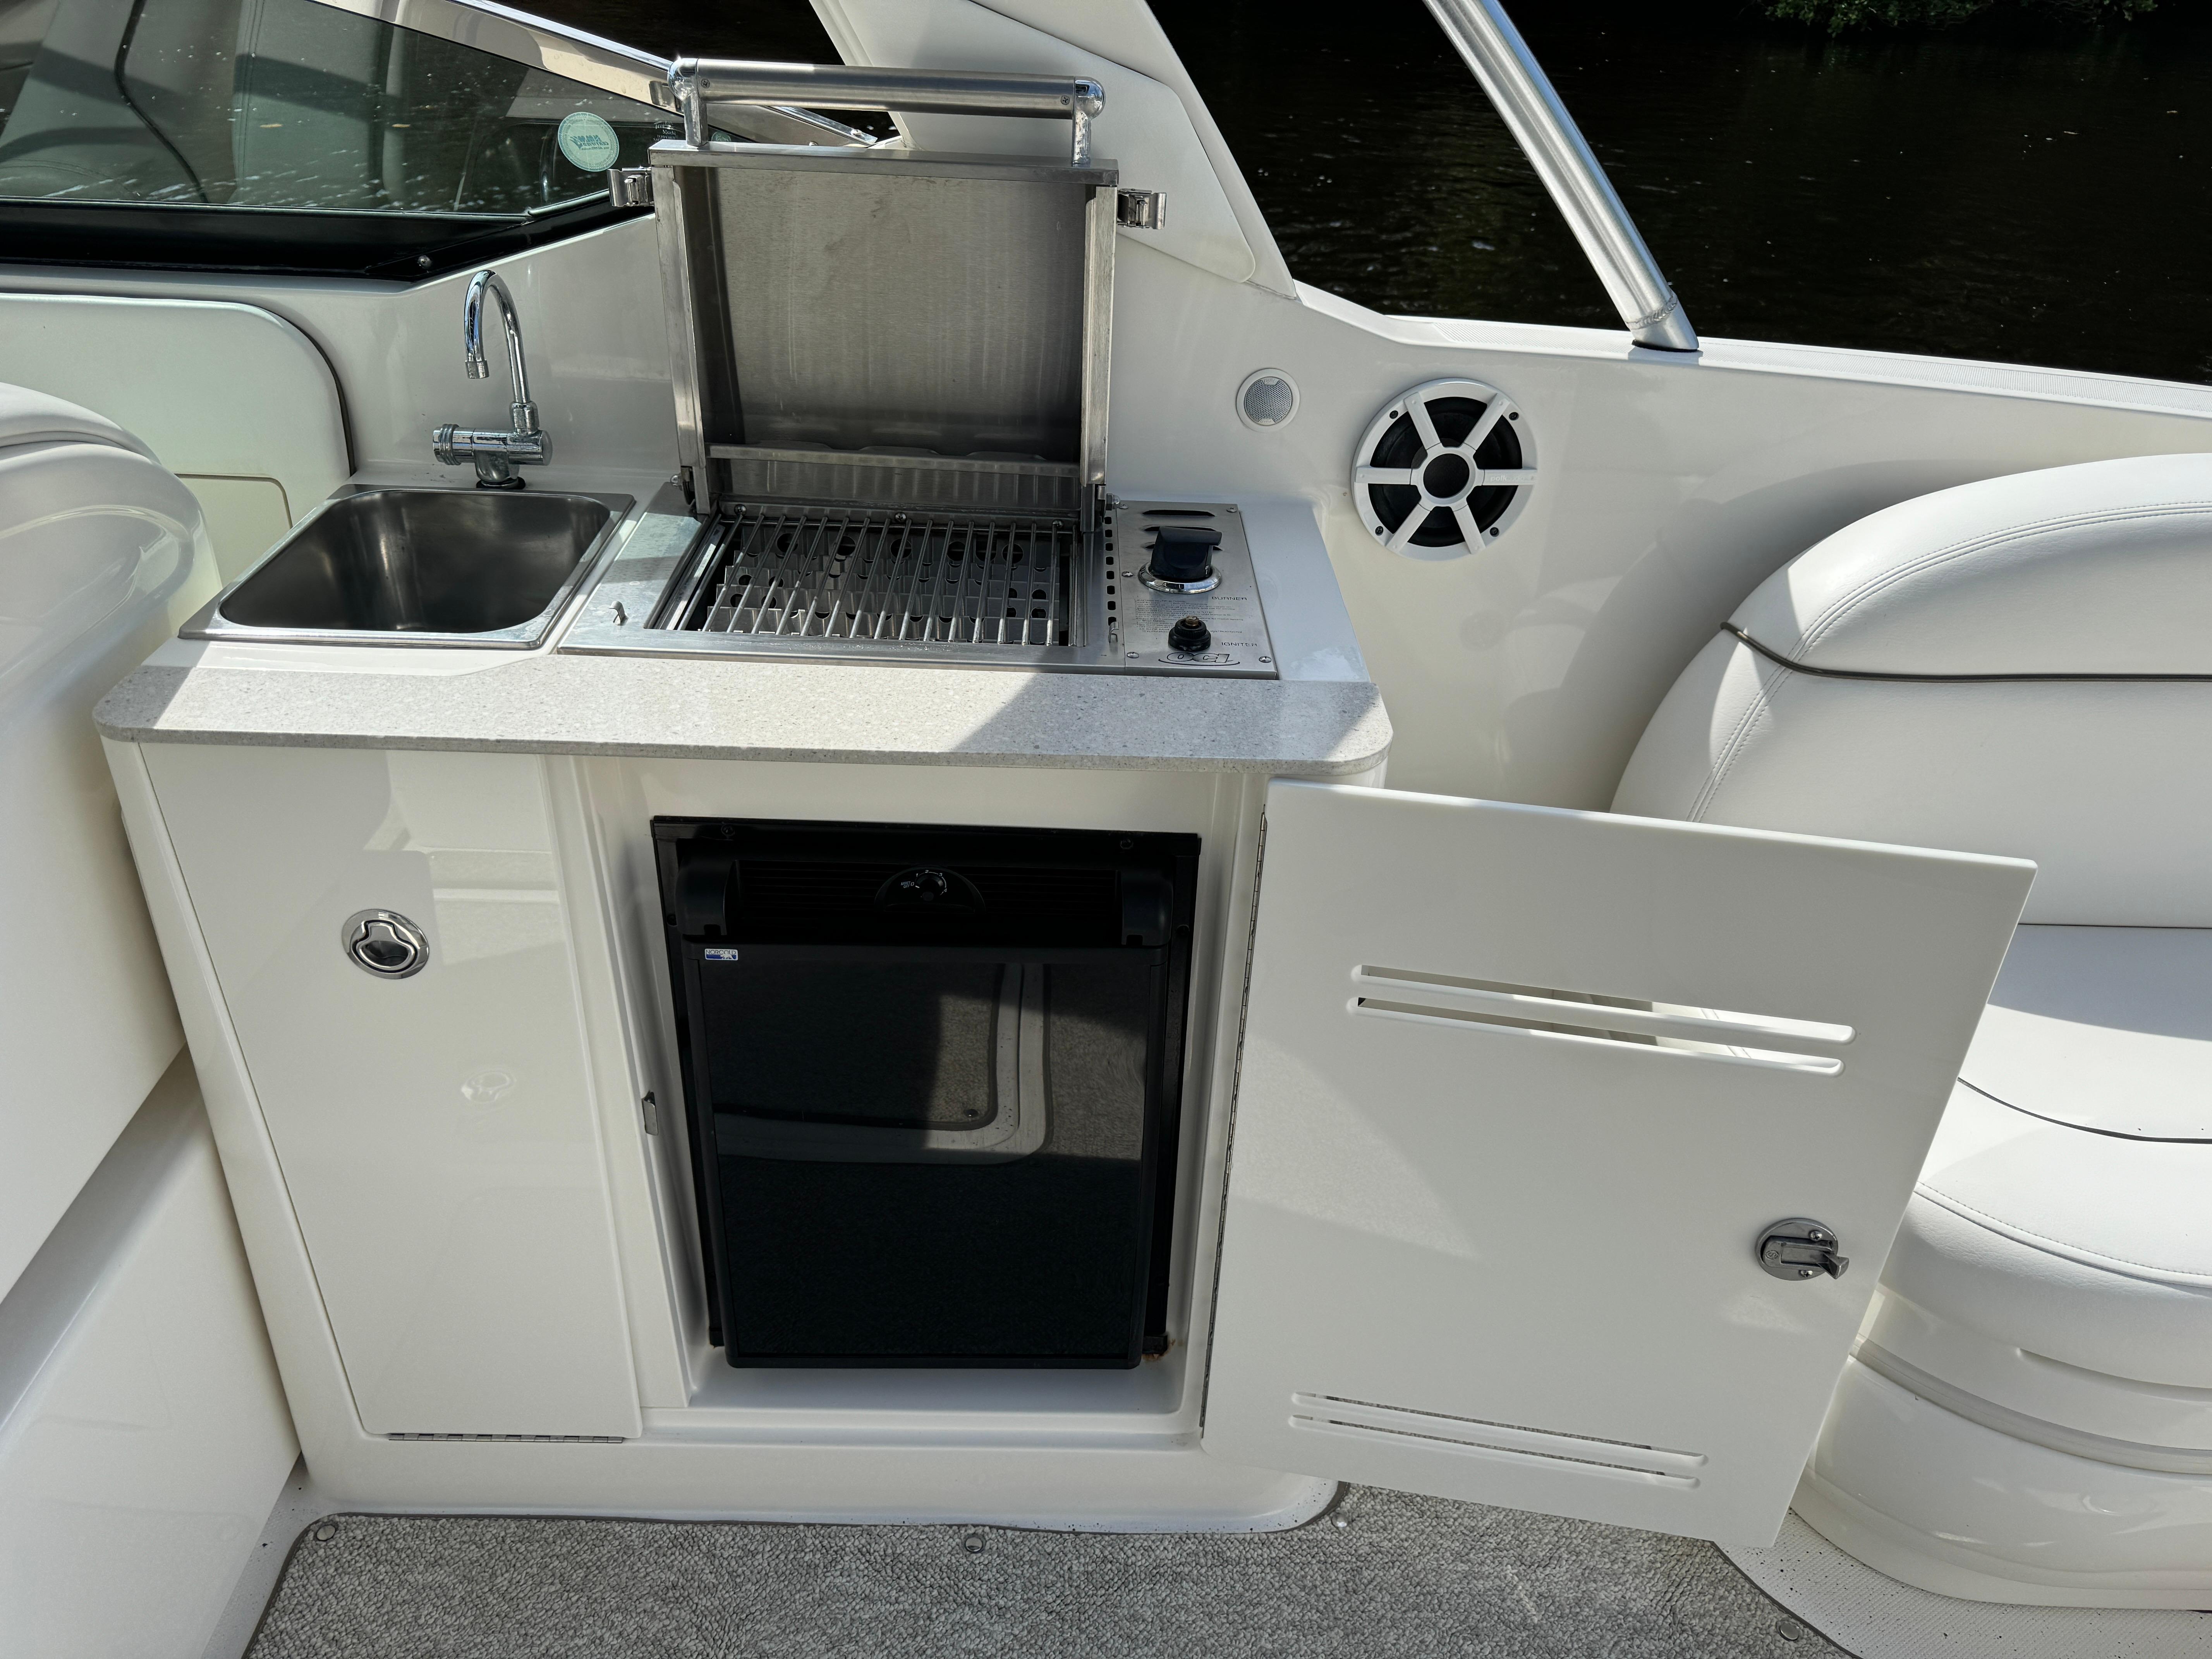 Sea Ray 300 SLX - Grill and Sink